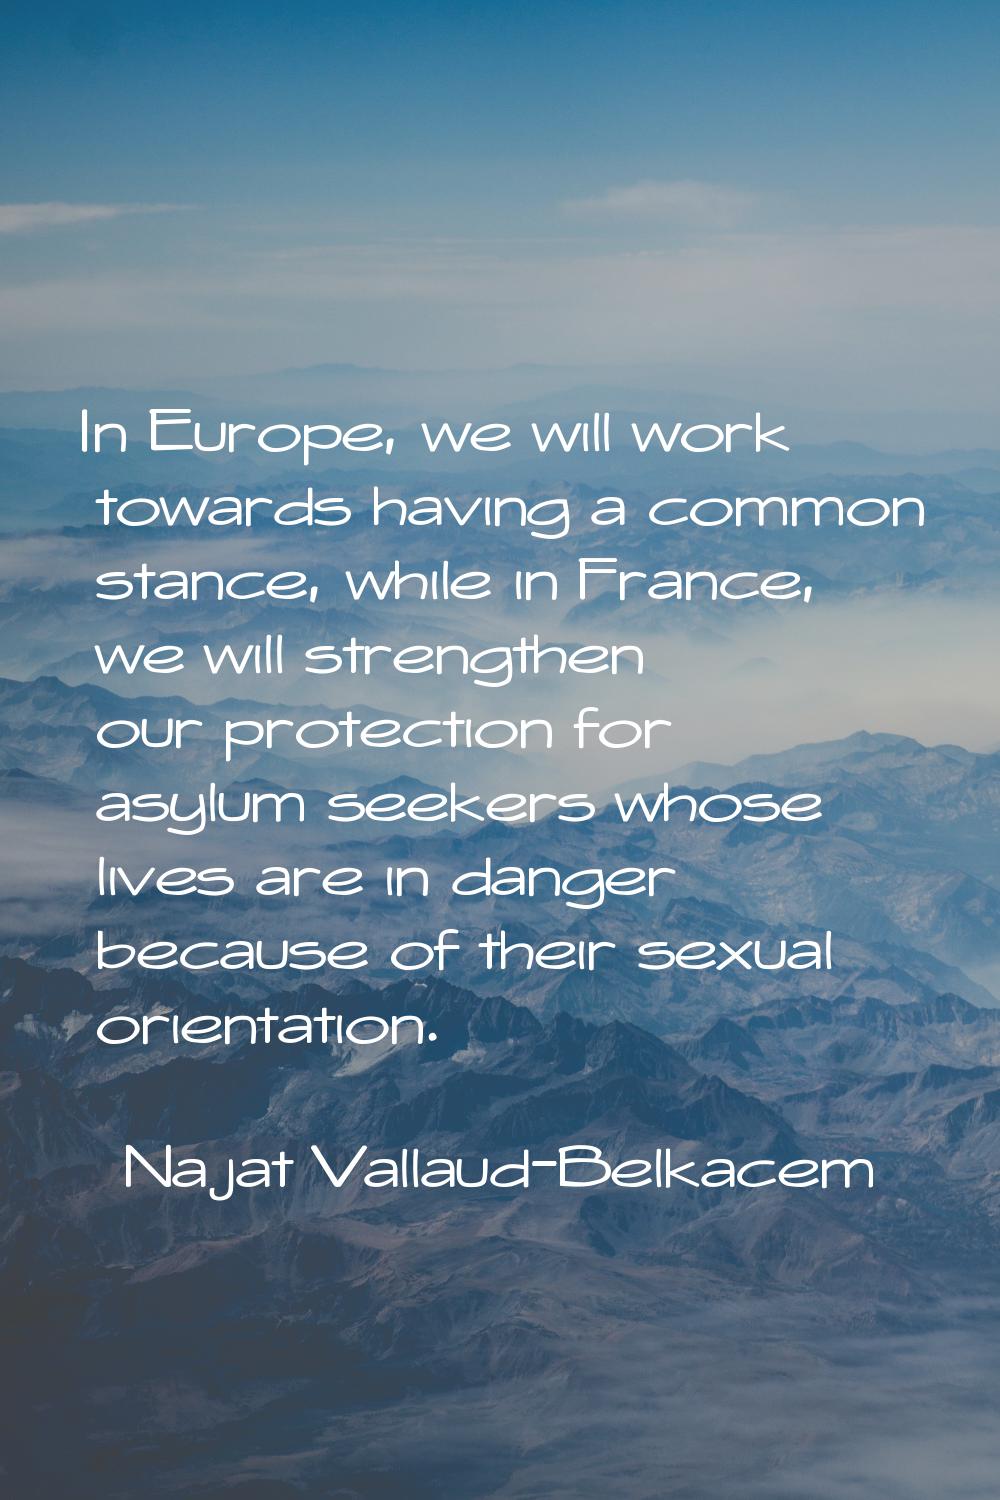 In Europe, we will work towards having a common stance, while in France, we will strengthen our pro